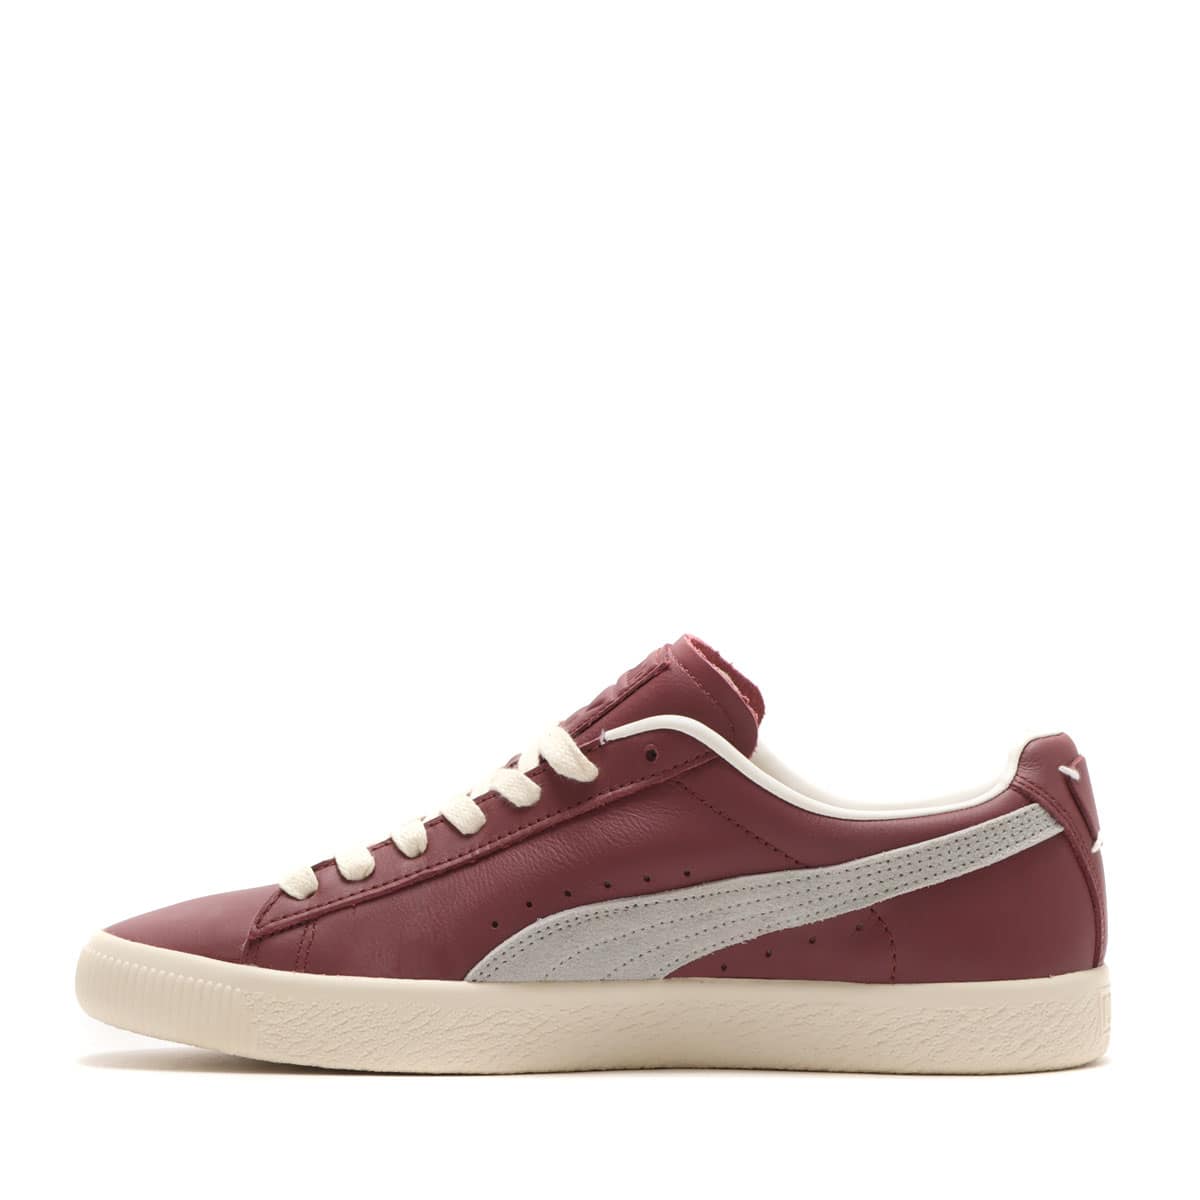 PUMA CLYDE BASE WOOD VIOLET-FROSTED IVORY-PU 23SU-I